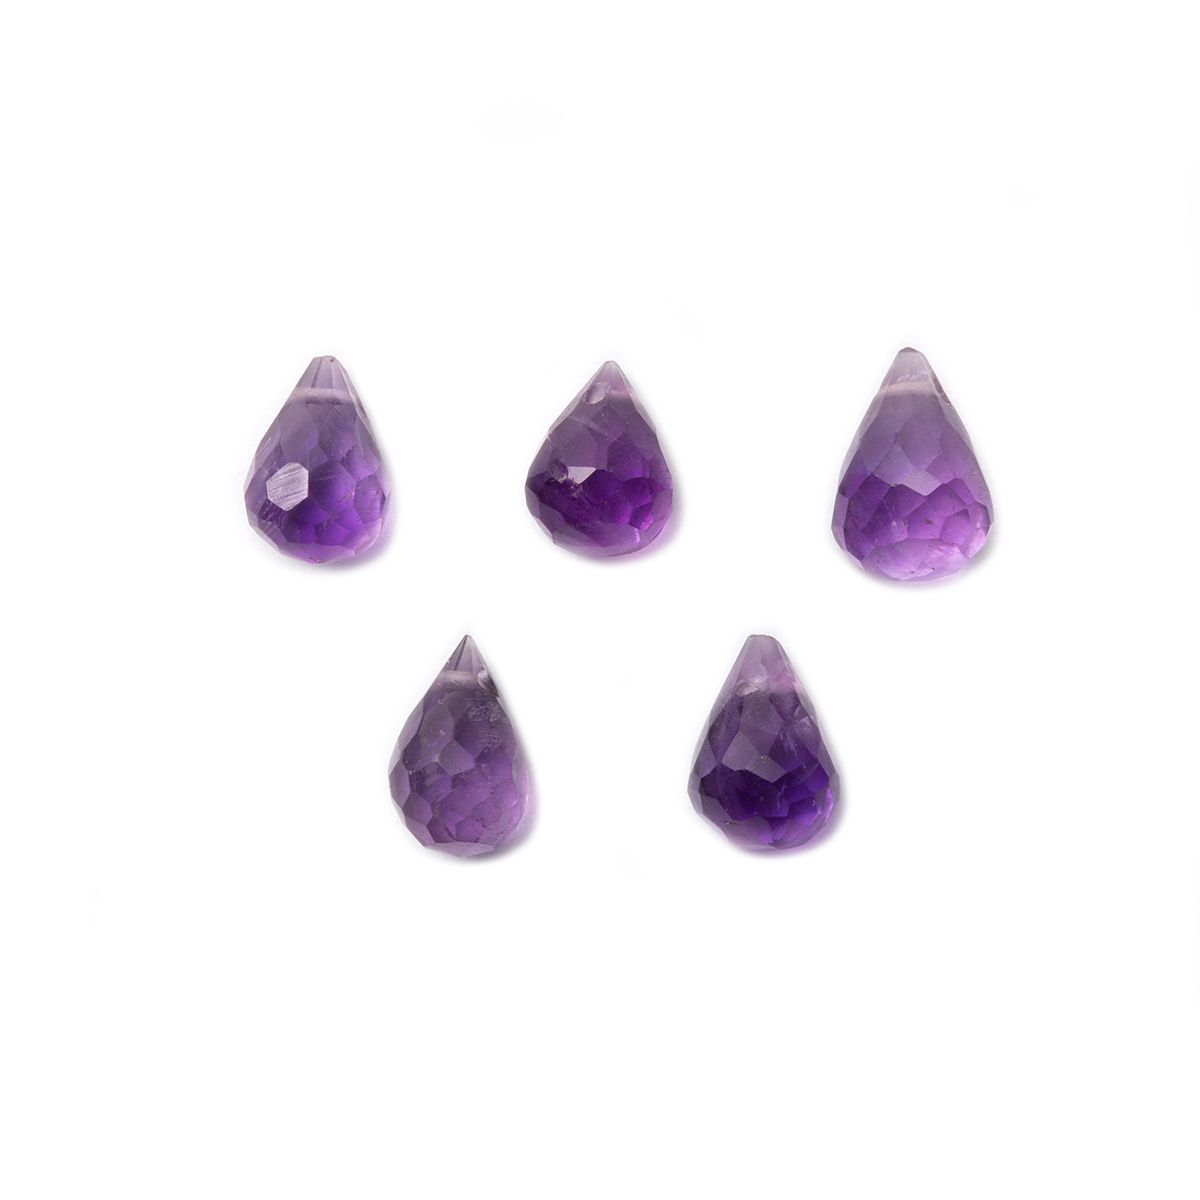 Amethyst Faceted Drop Briolette Beads - Approx From 6x4mm, Pack Of 10 Beads